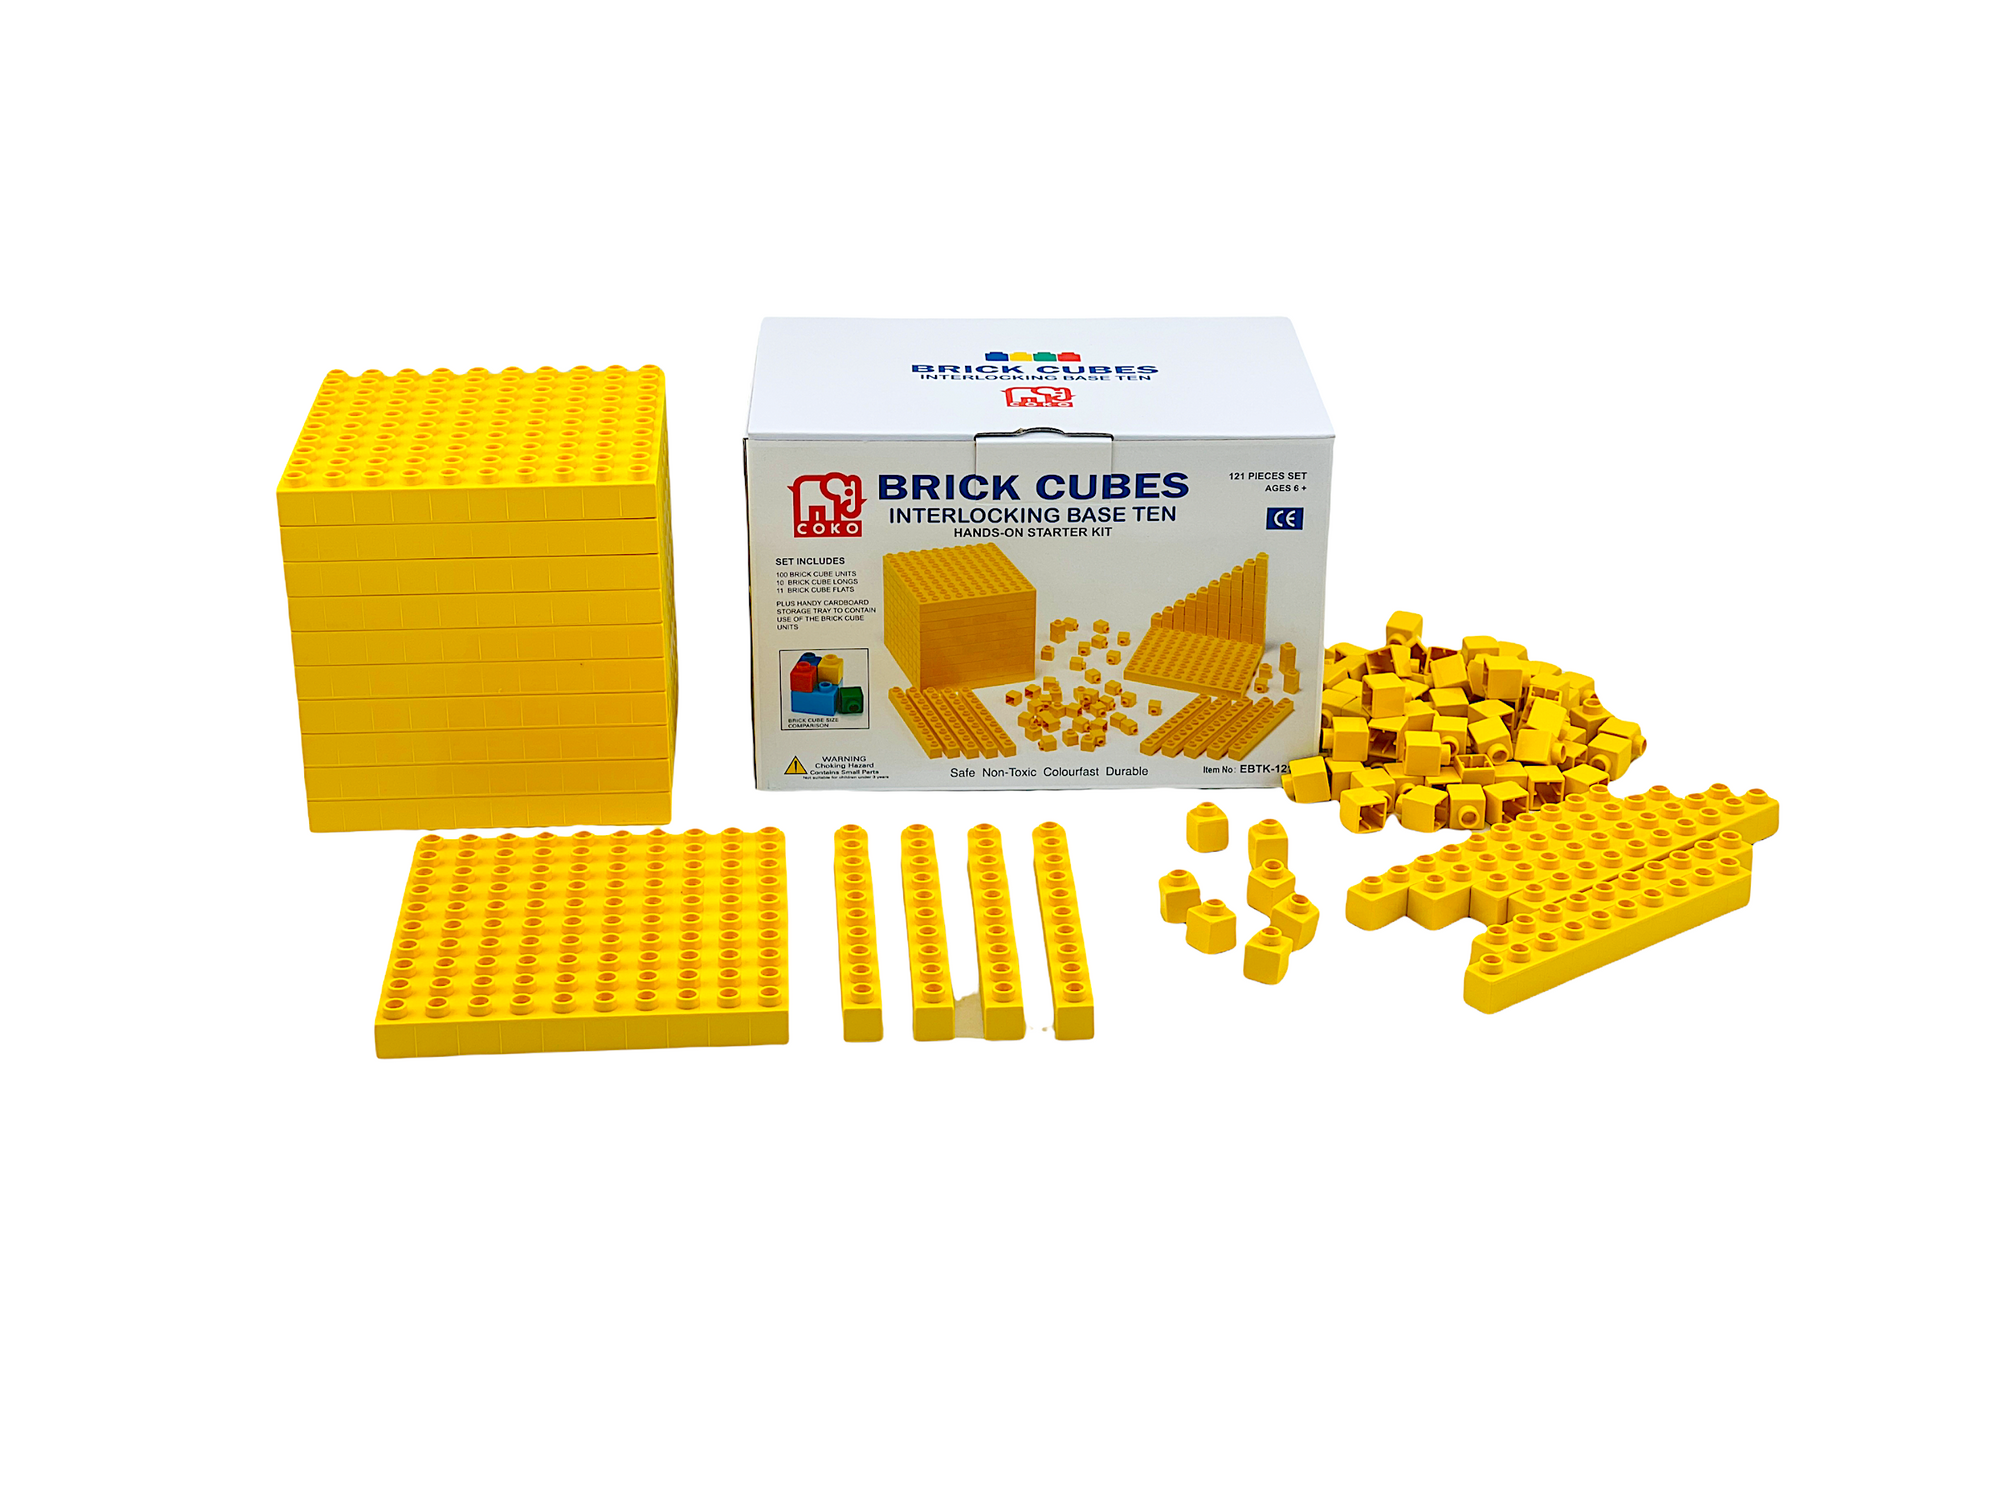 the Coko Brick Cubes Interlocking Base Ten set on display with all of the yellow pieces in front of the white box